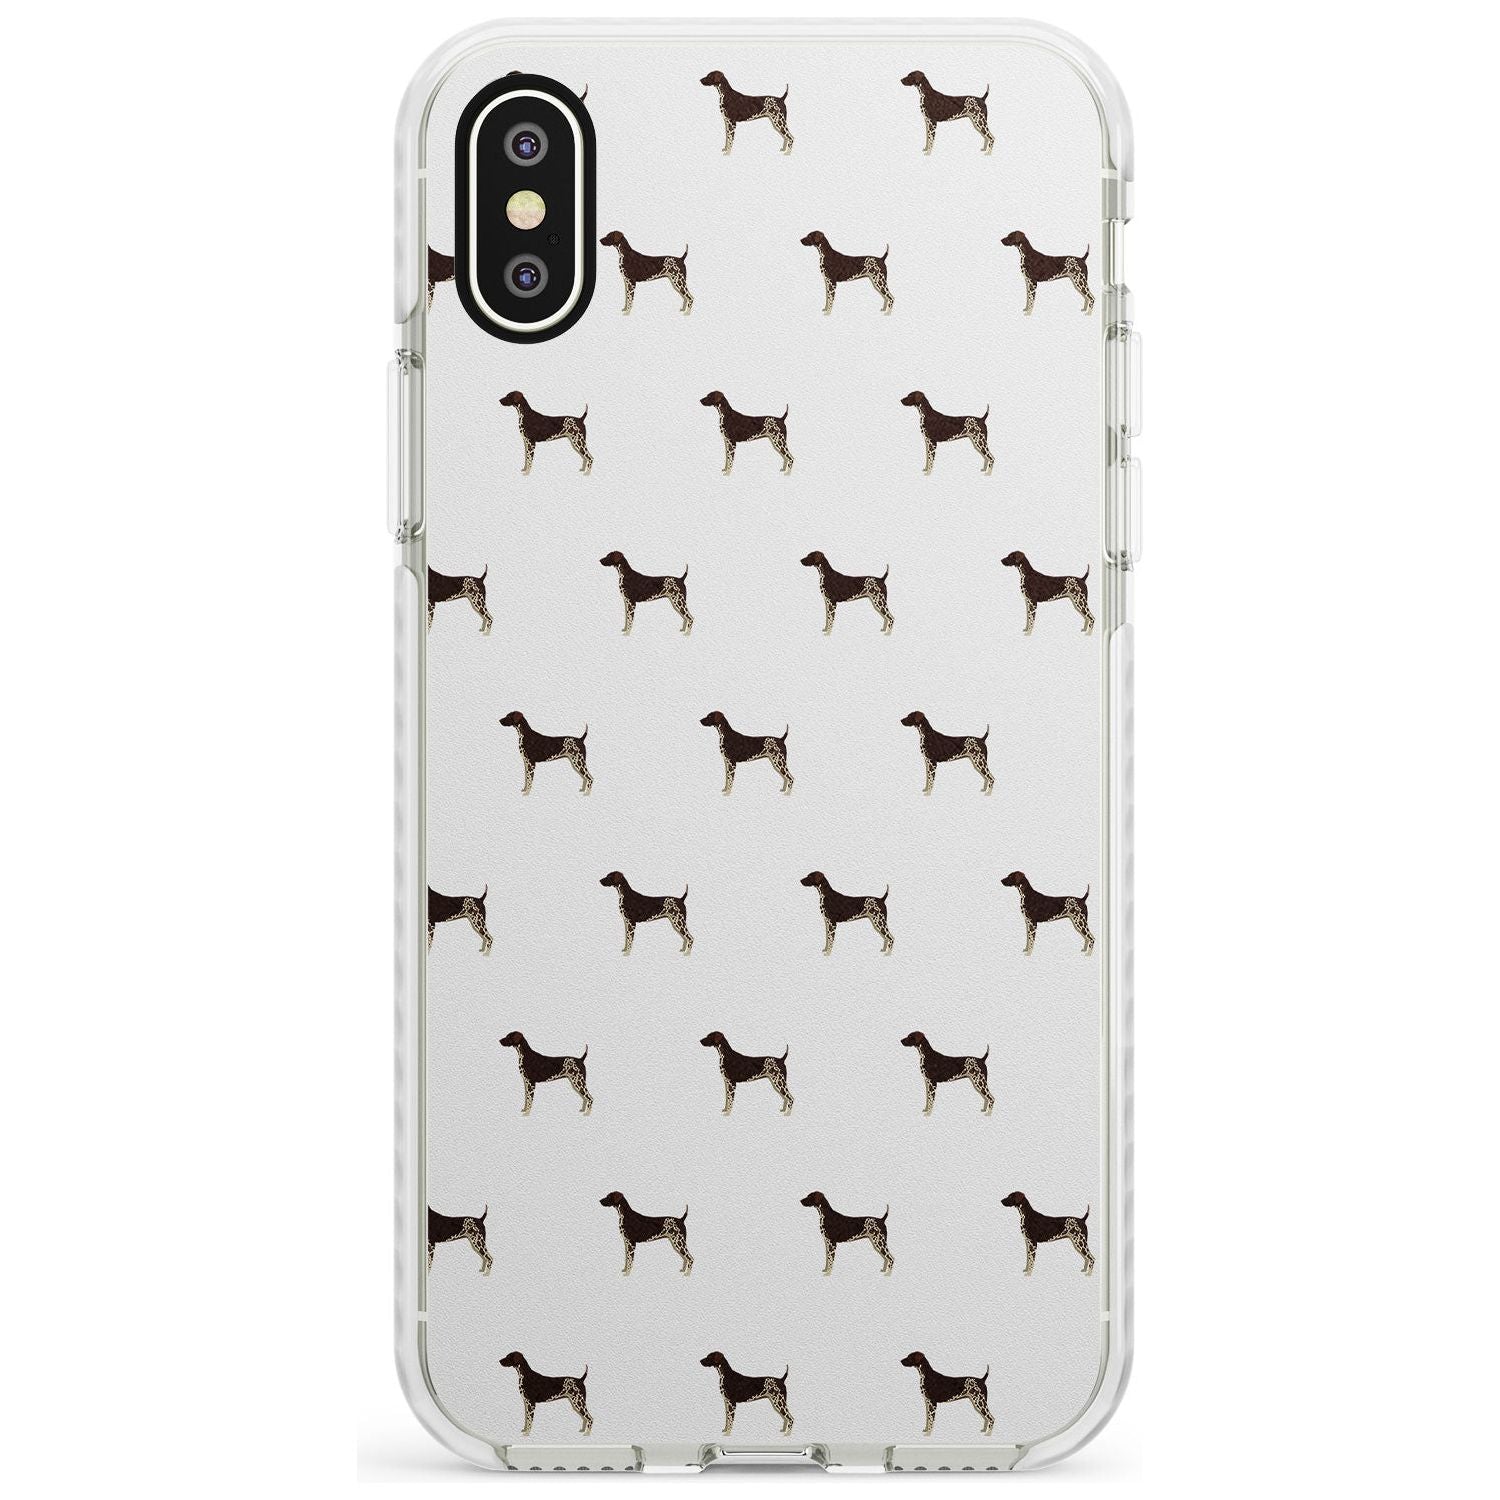 German Shorthaired Pointer Dog Pattern Impact Phone Case for iPhone X XS Max XR